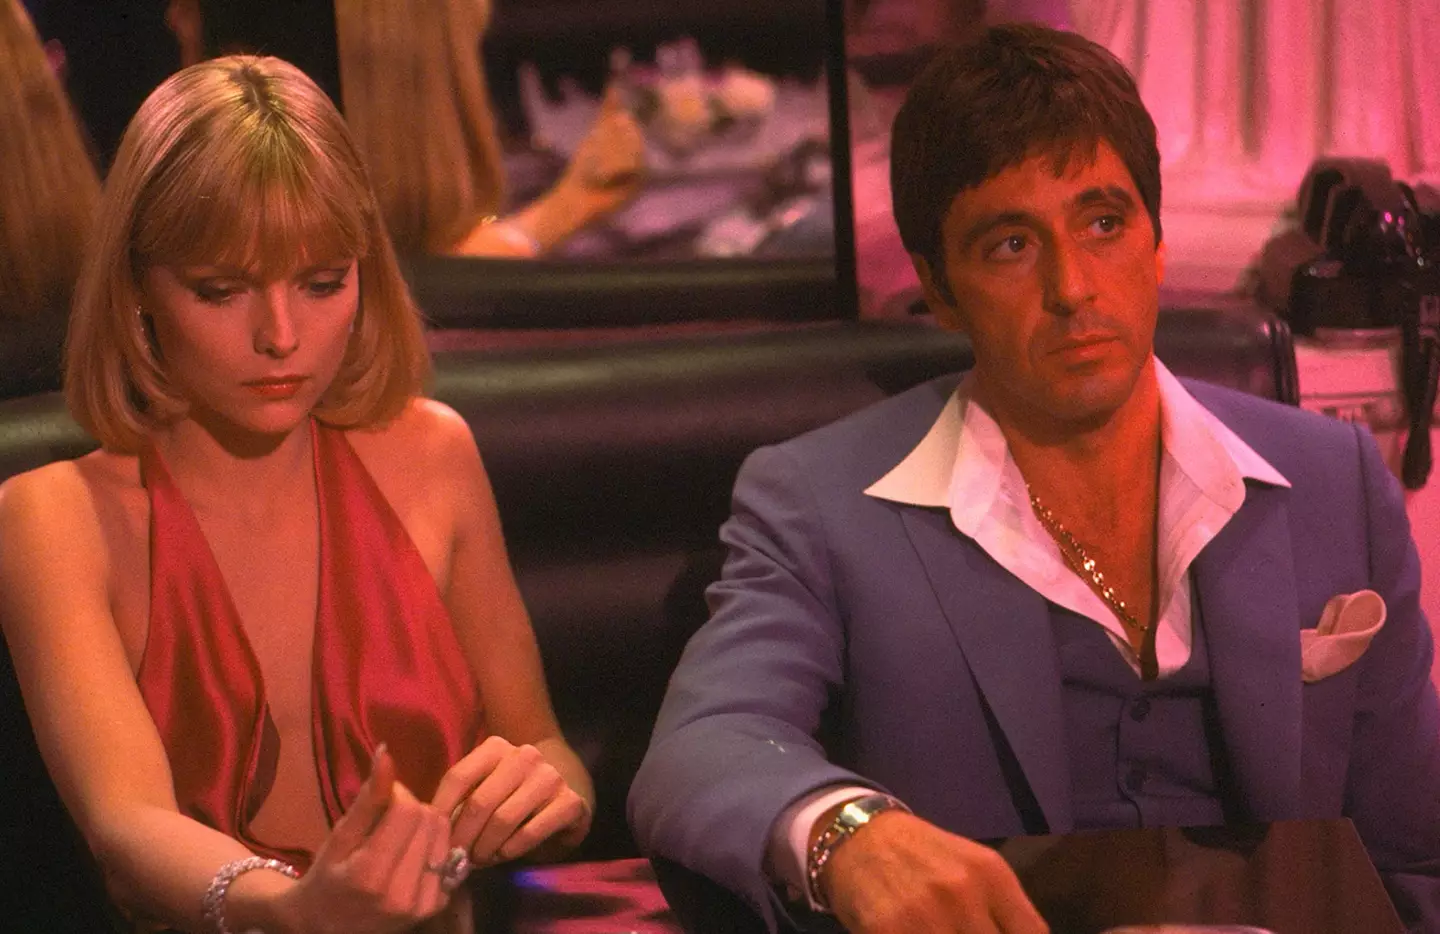 Pacino originally 'wanted someone else' to be cast for the role.